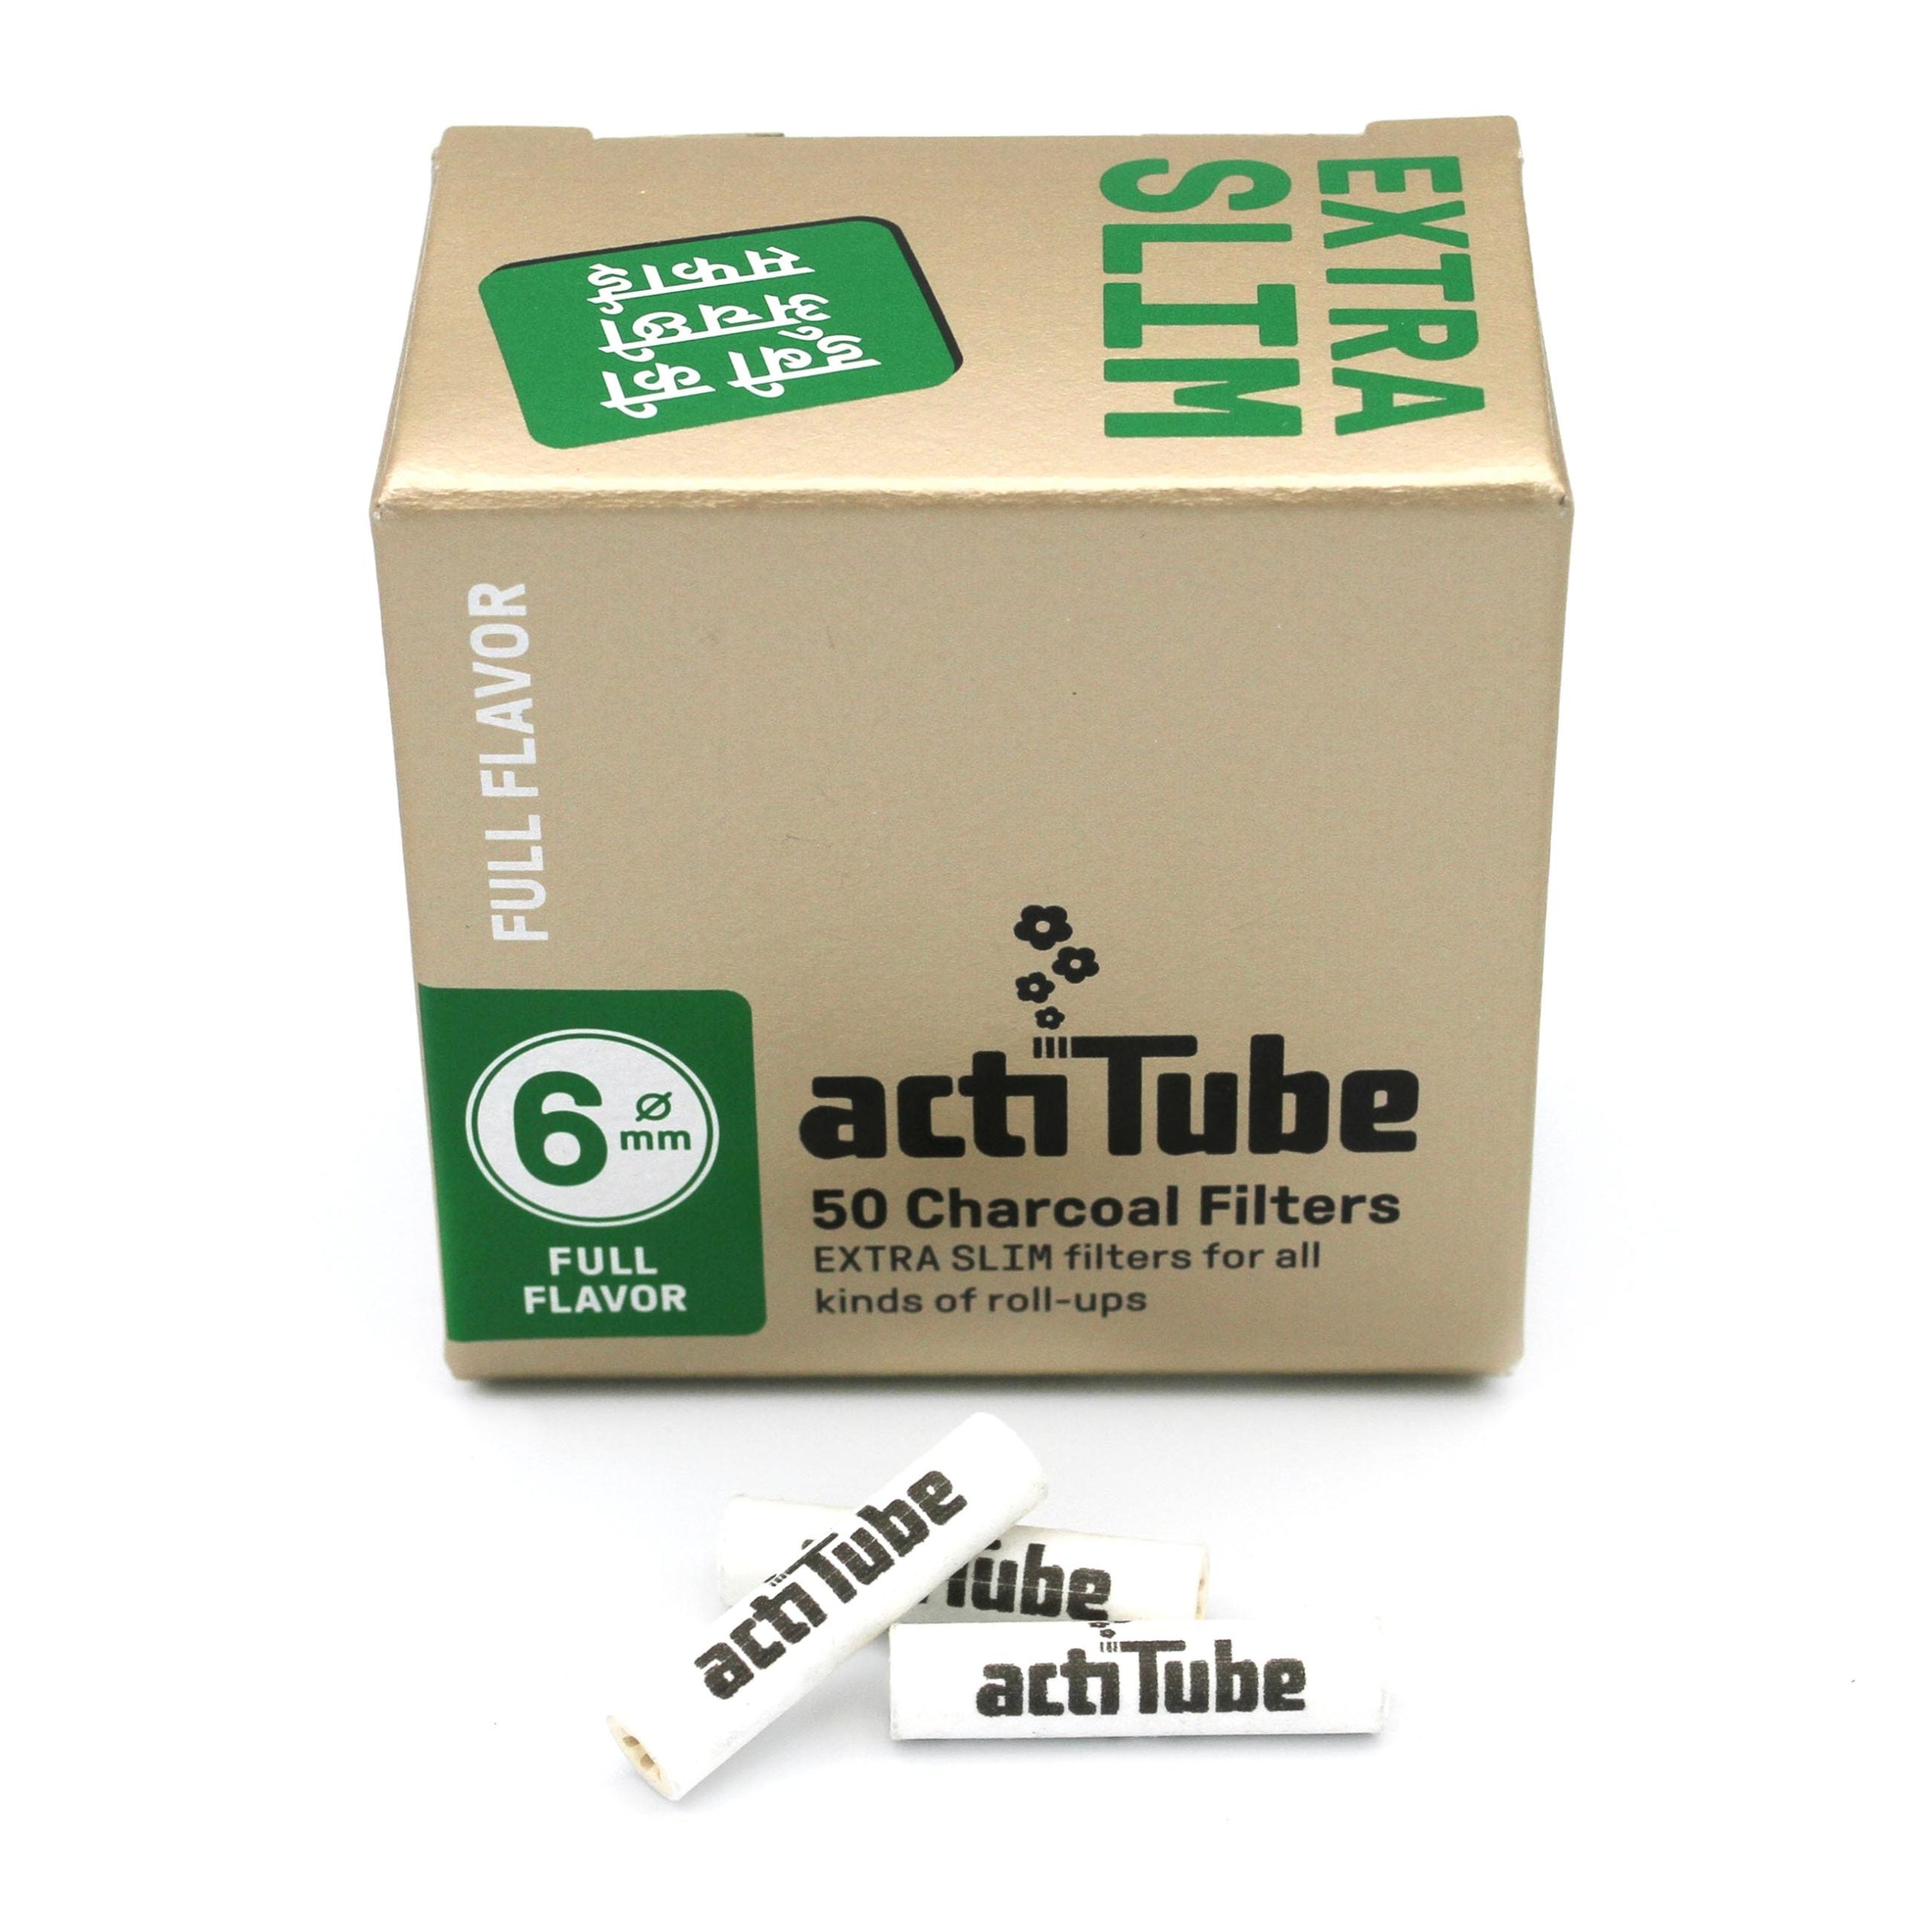 Actitube Extra Slim 6mm Activated Charcoal Filters –